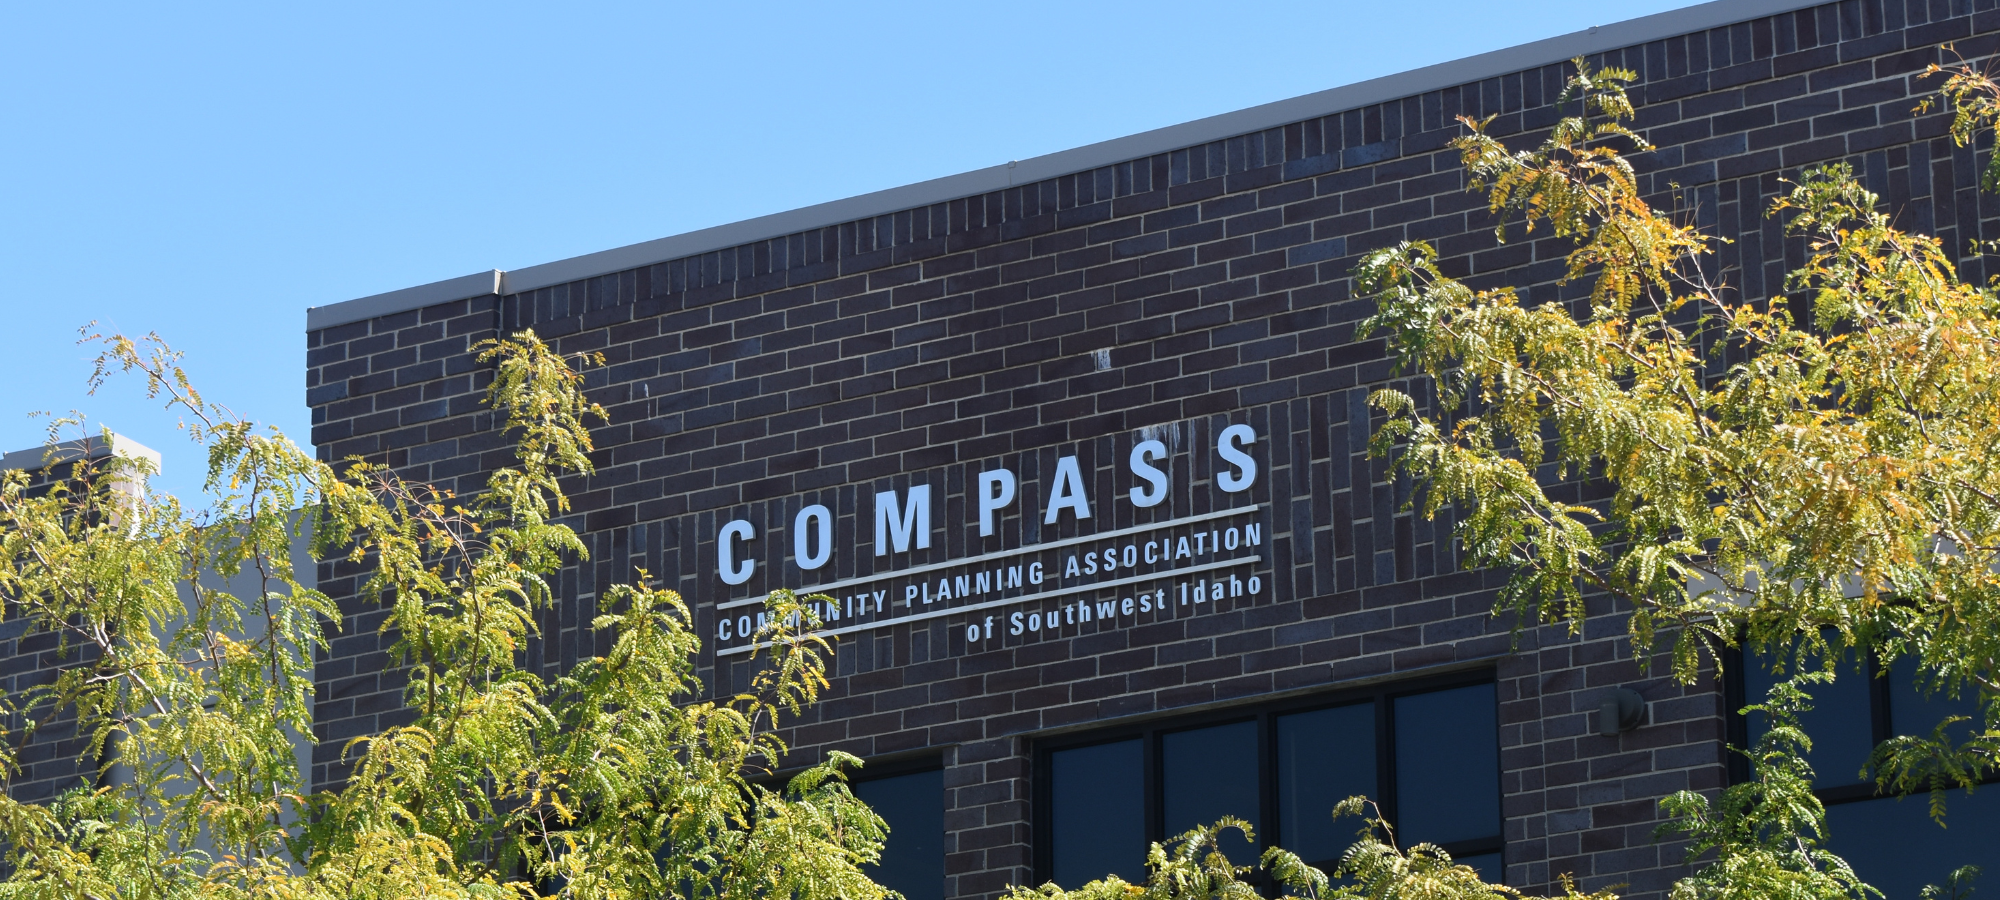 COMPASS - The Community Planning Assocation of Southwest Idaho's Building with green trees